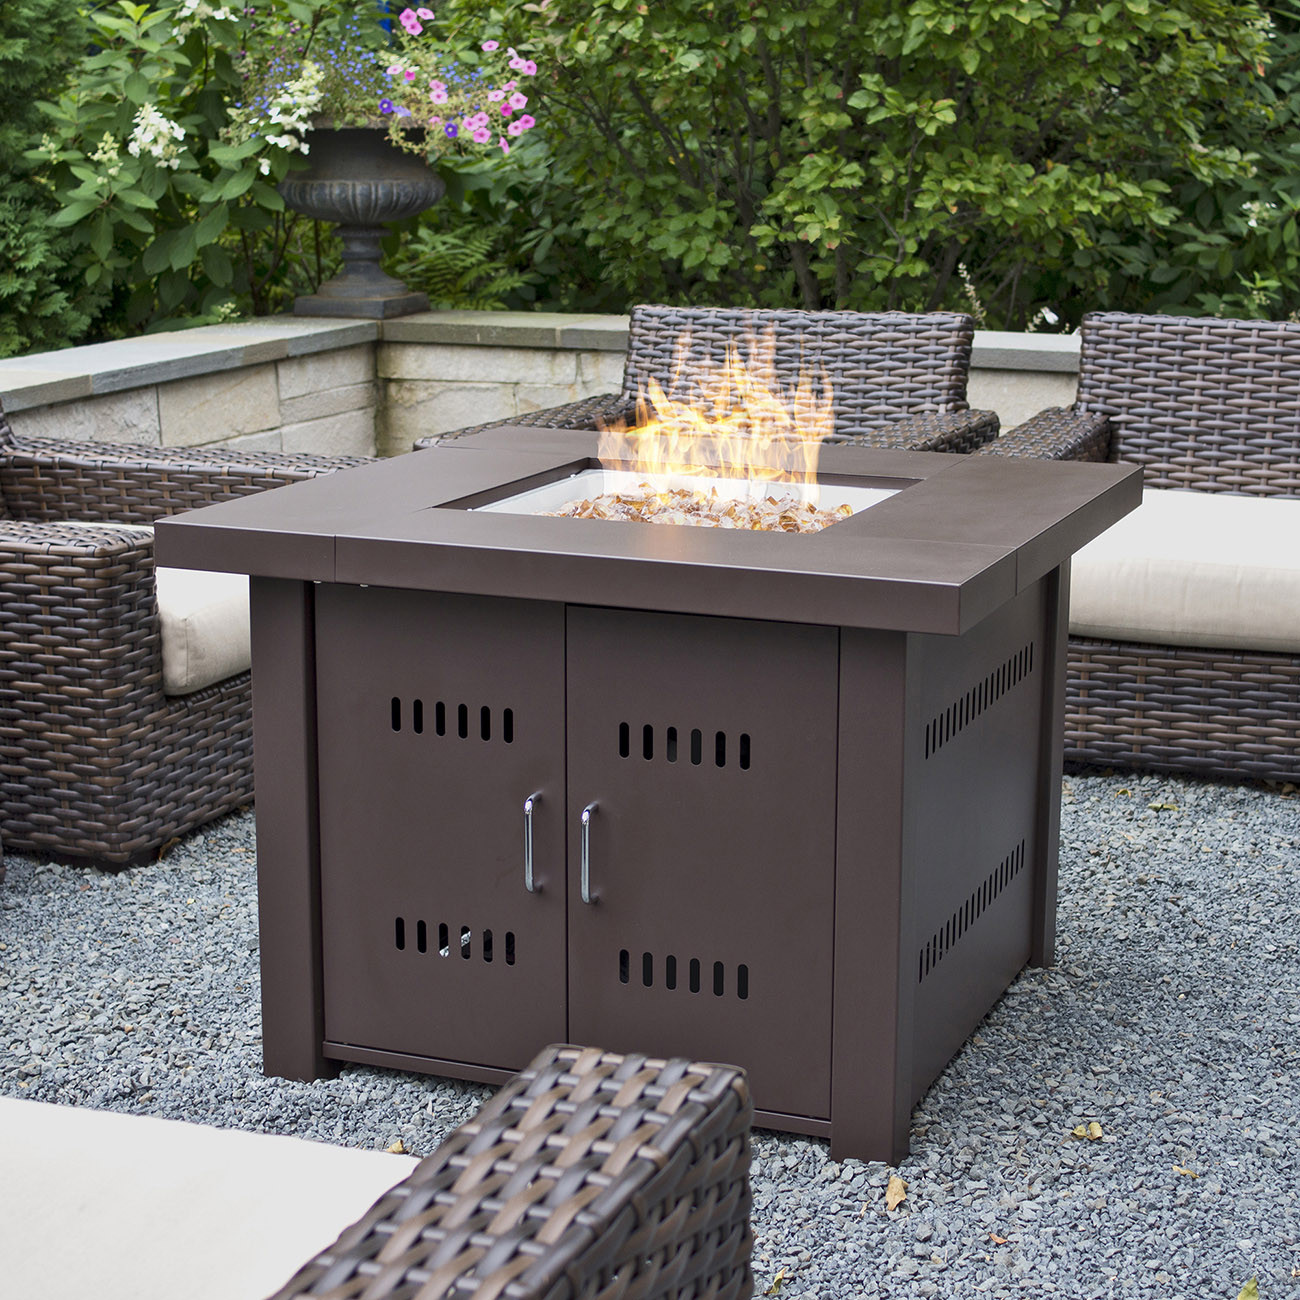 Backyard Propane Fire Pit
 NEW Outdoor Fire Pit Square Table Firepit Propane Gas Fire